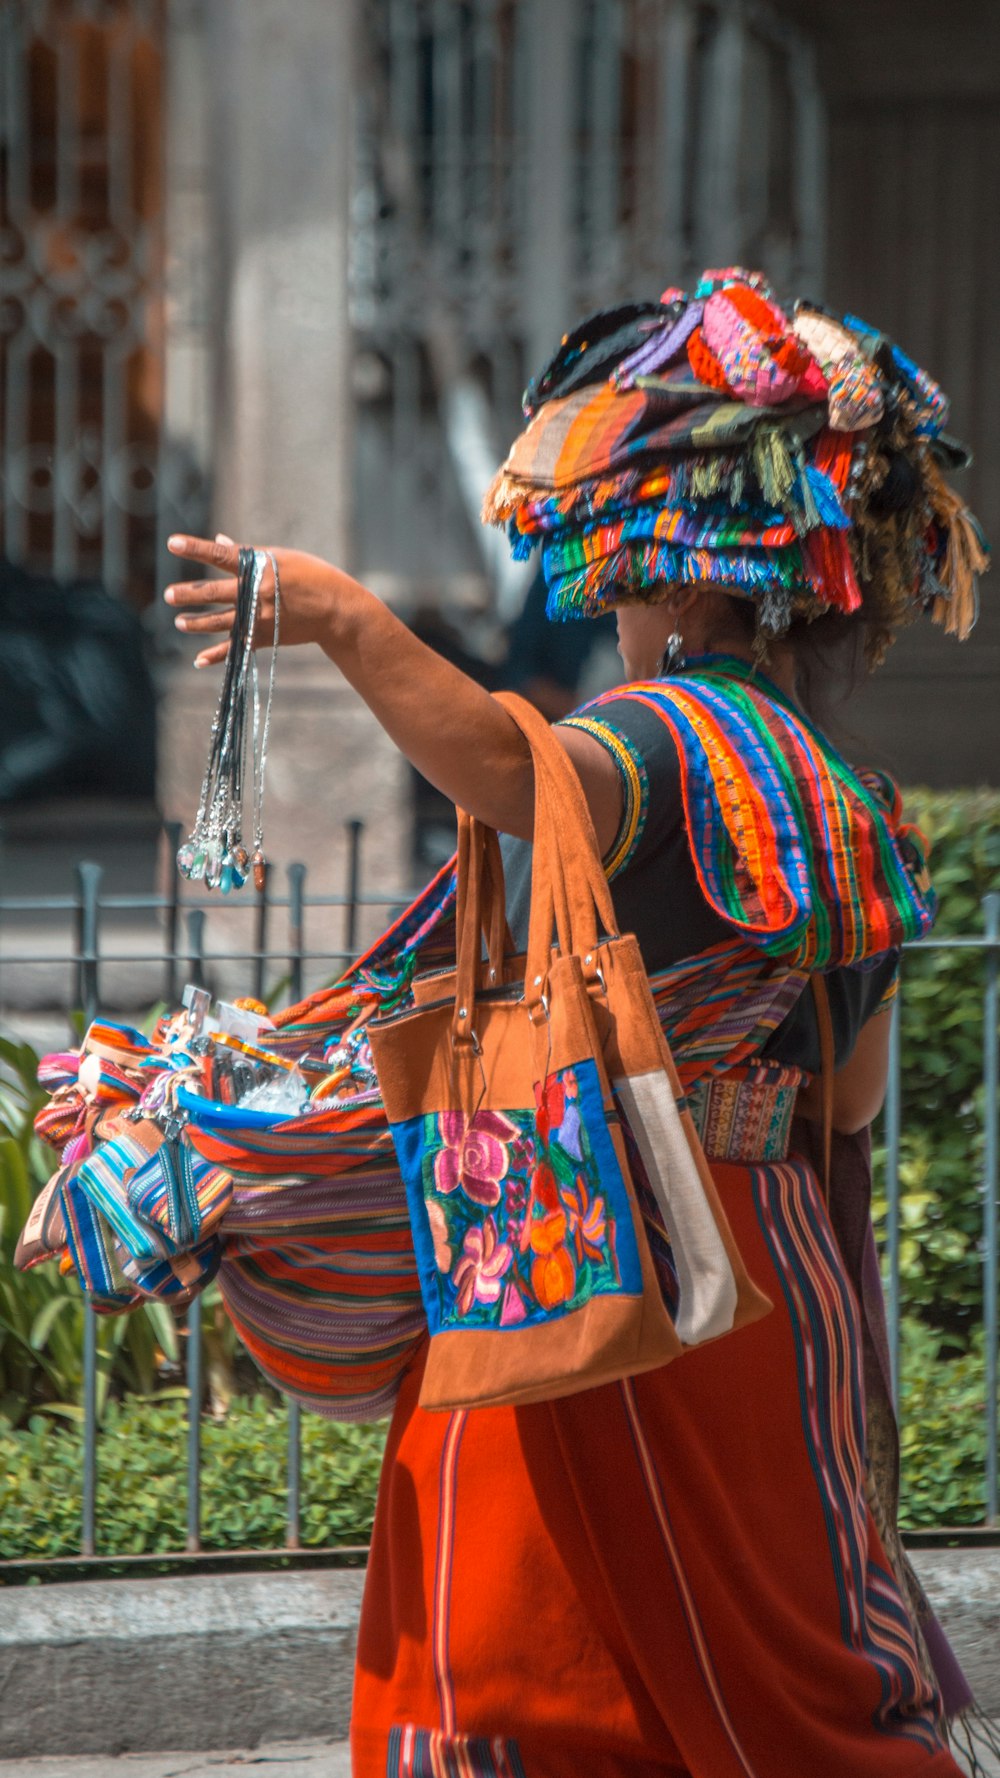 a person in a colorful dress carrying a bag